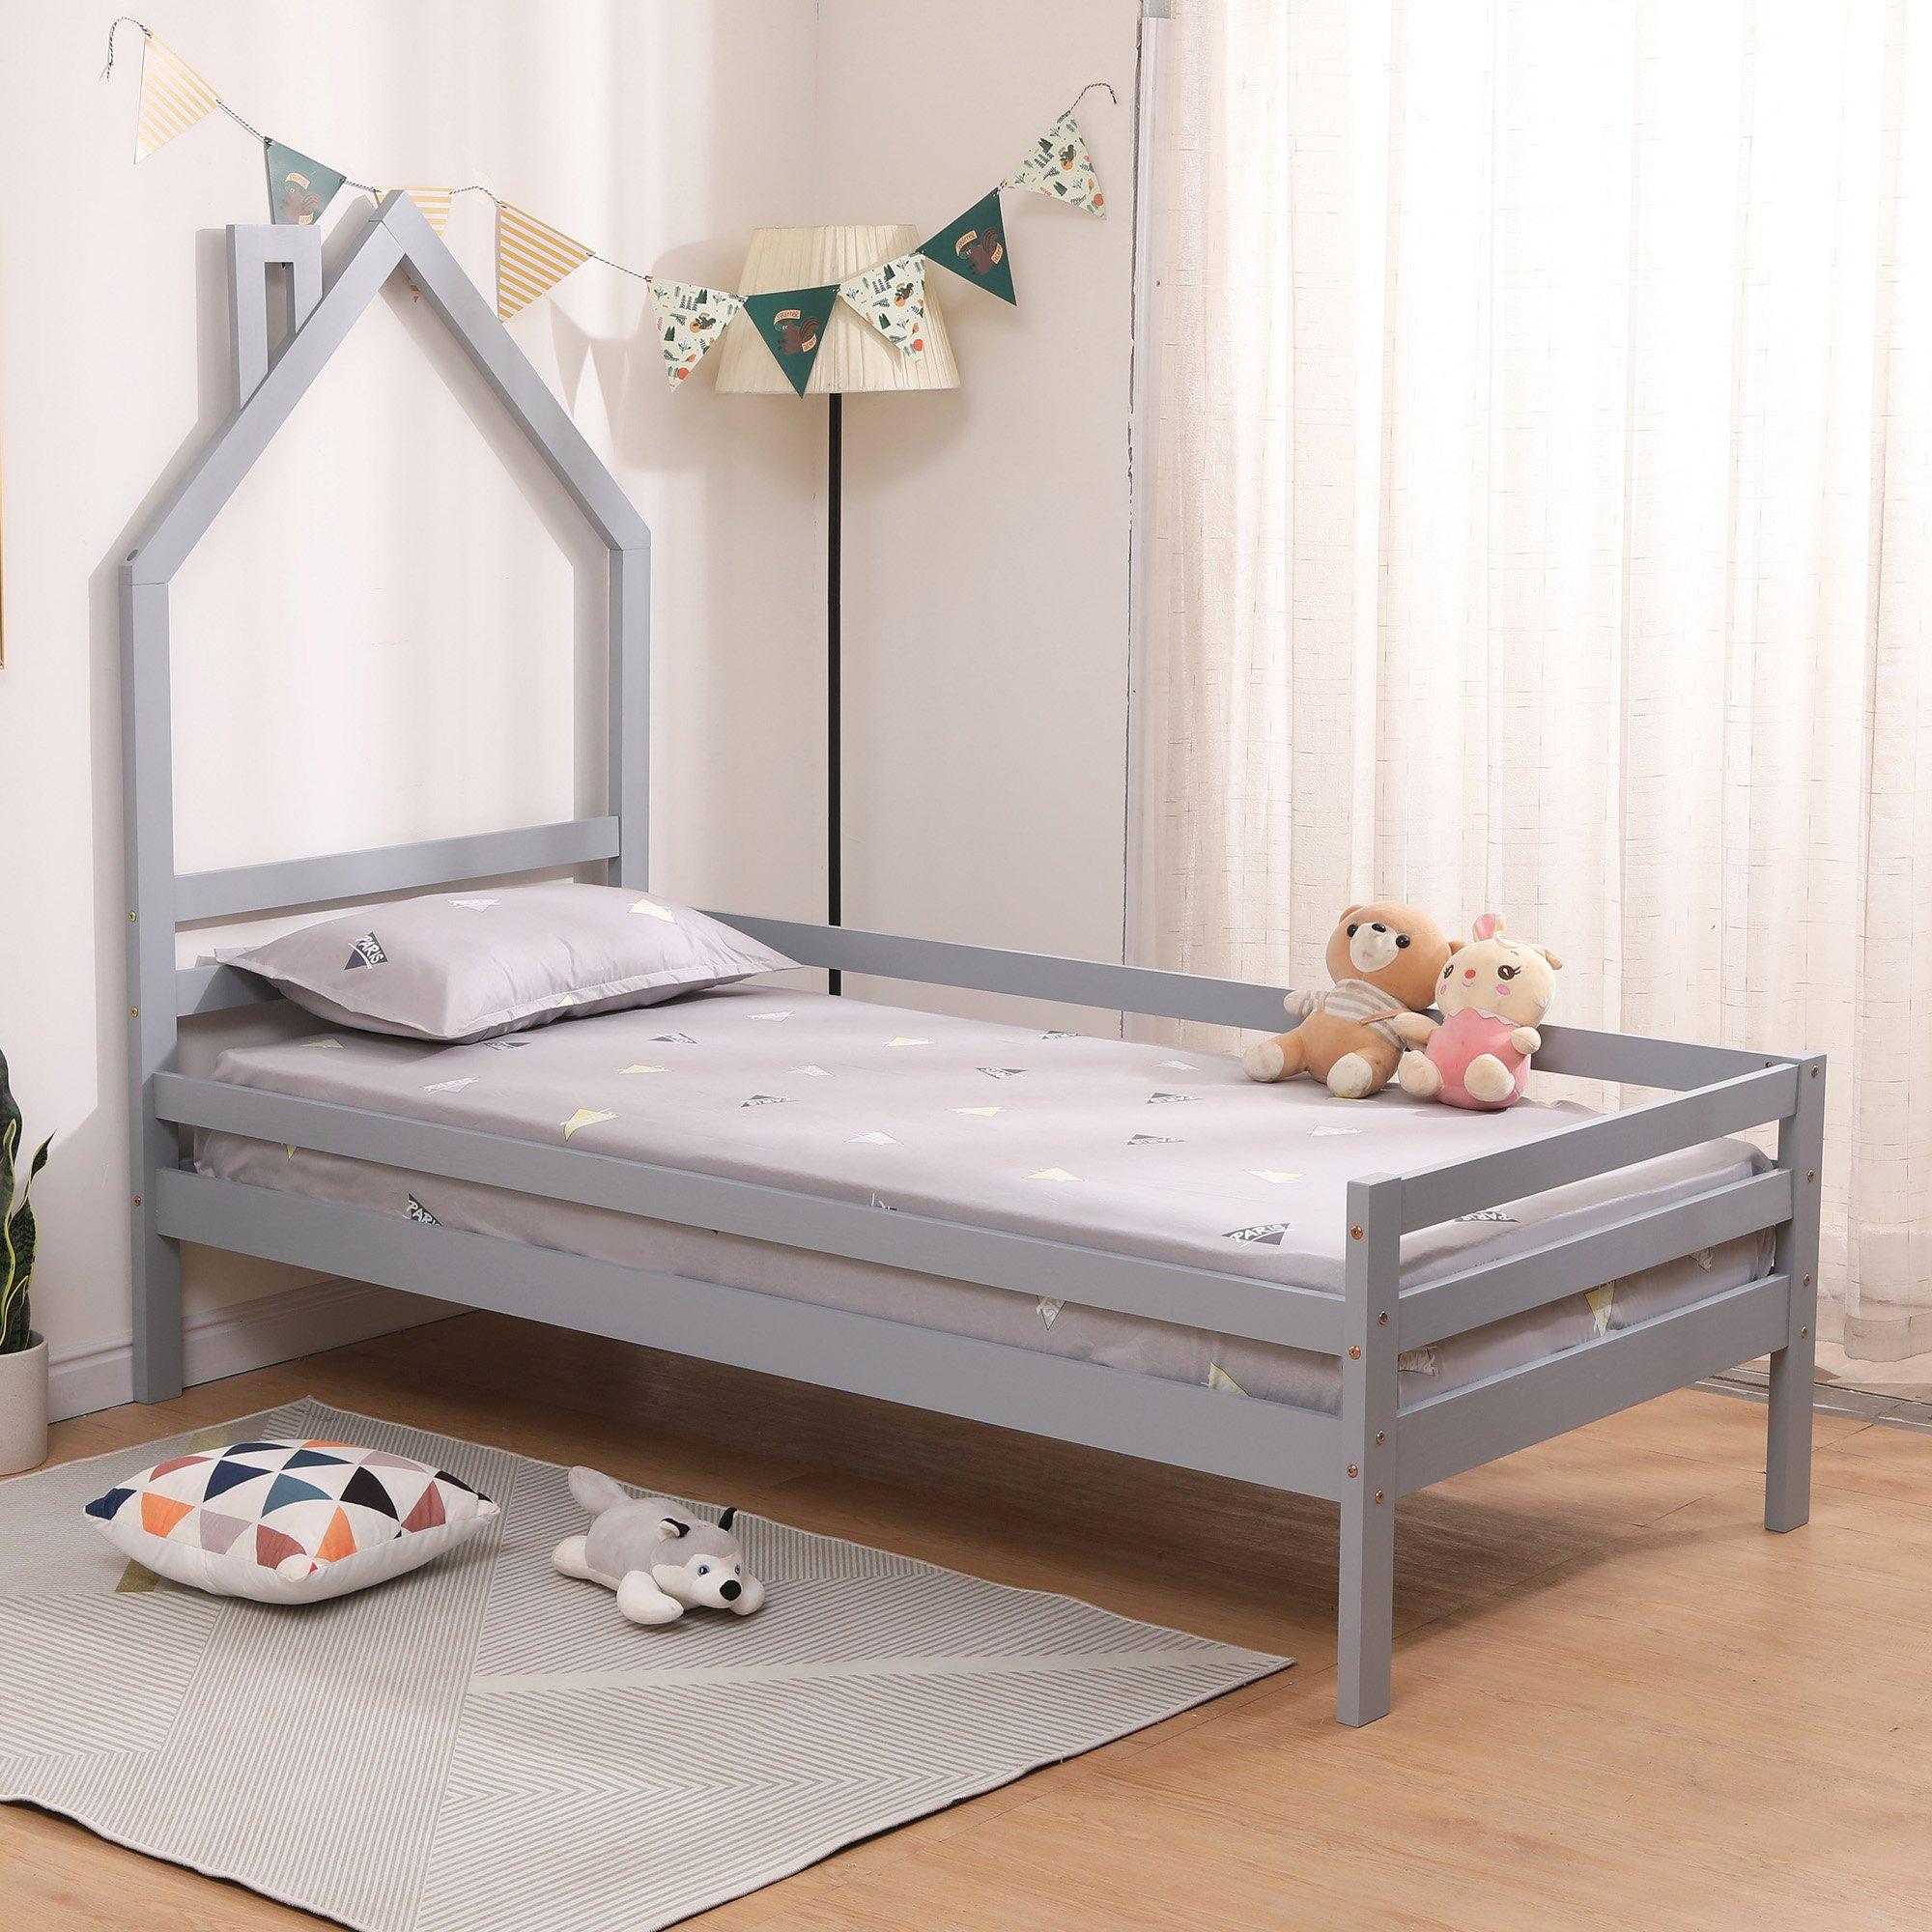 Theo Kids Childrens Wooden House Treehouse Style Single Bed Frame